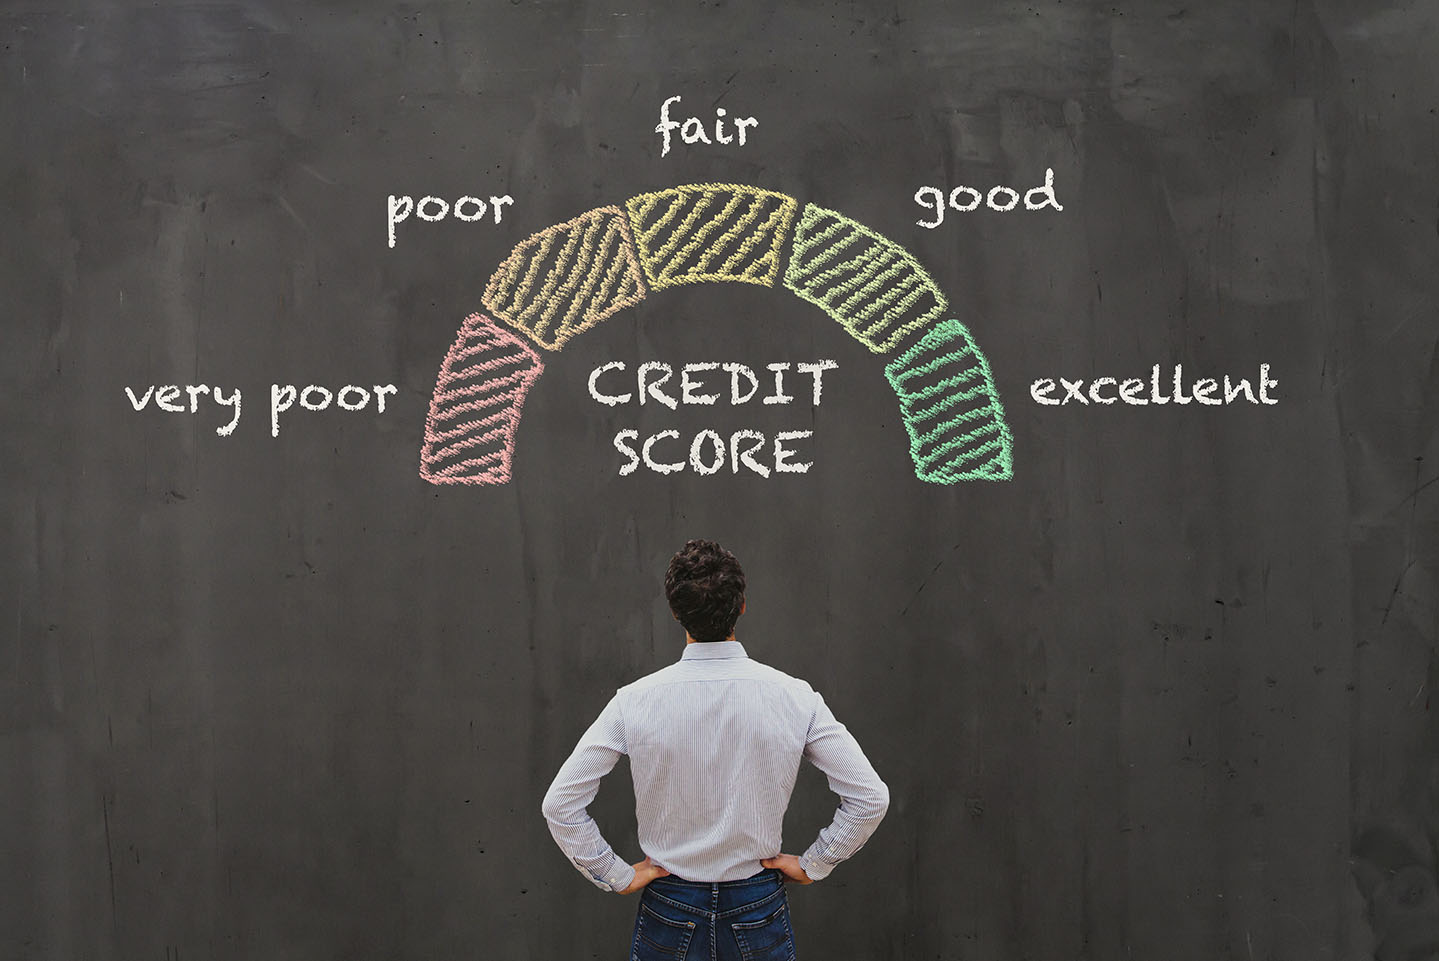 Image showing a man looking at a credit score chart